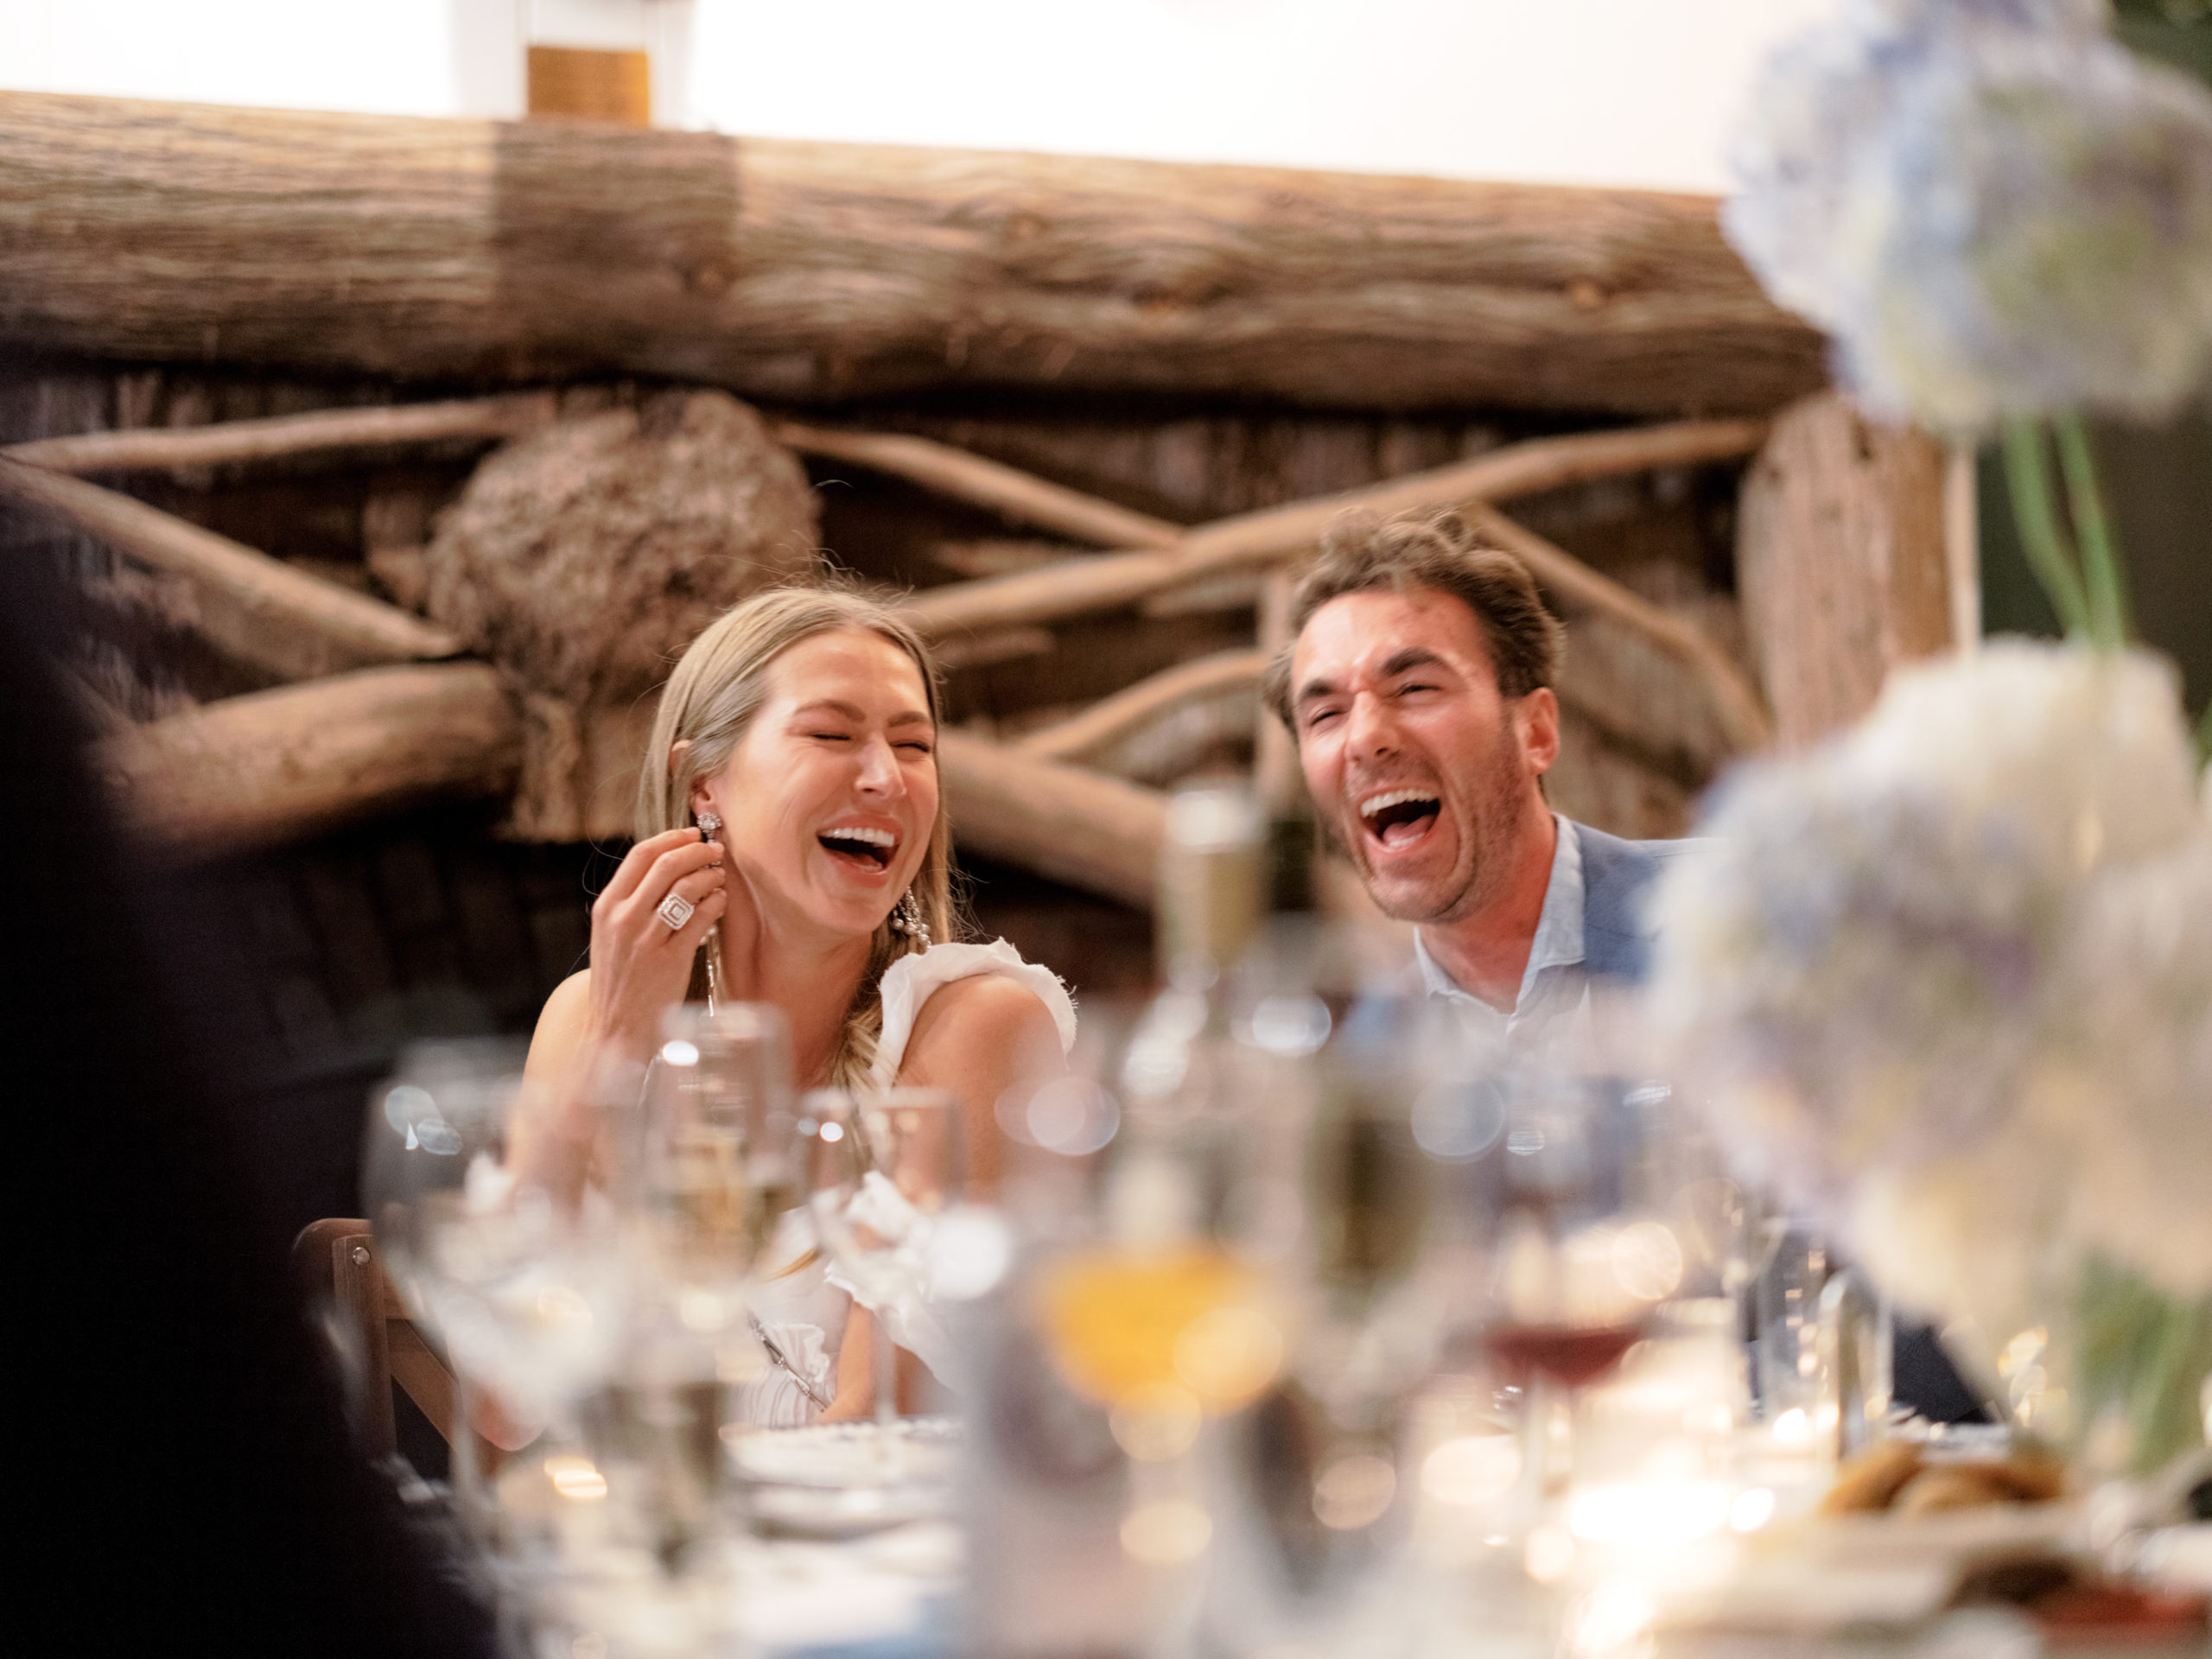 The bride and groom-to-be  are laughing in a welcome dinner at The Ausable Club NY. Image by Jenny Fu Studio